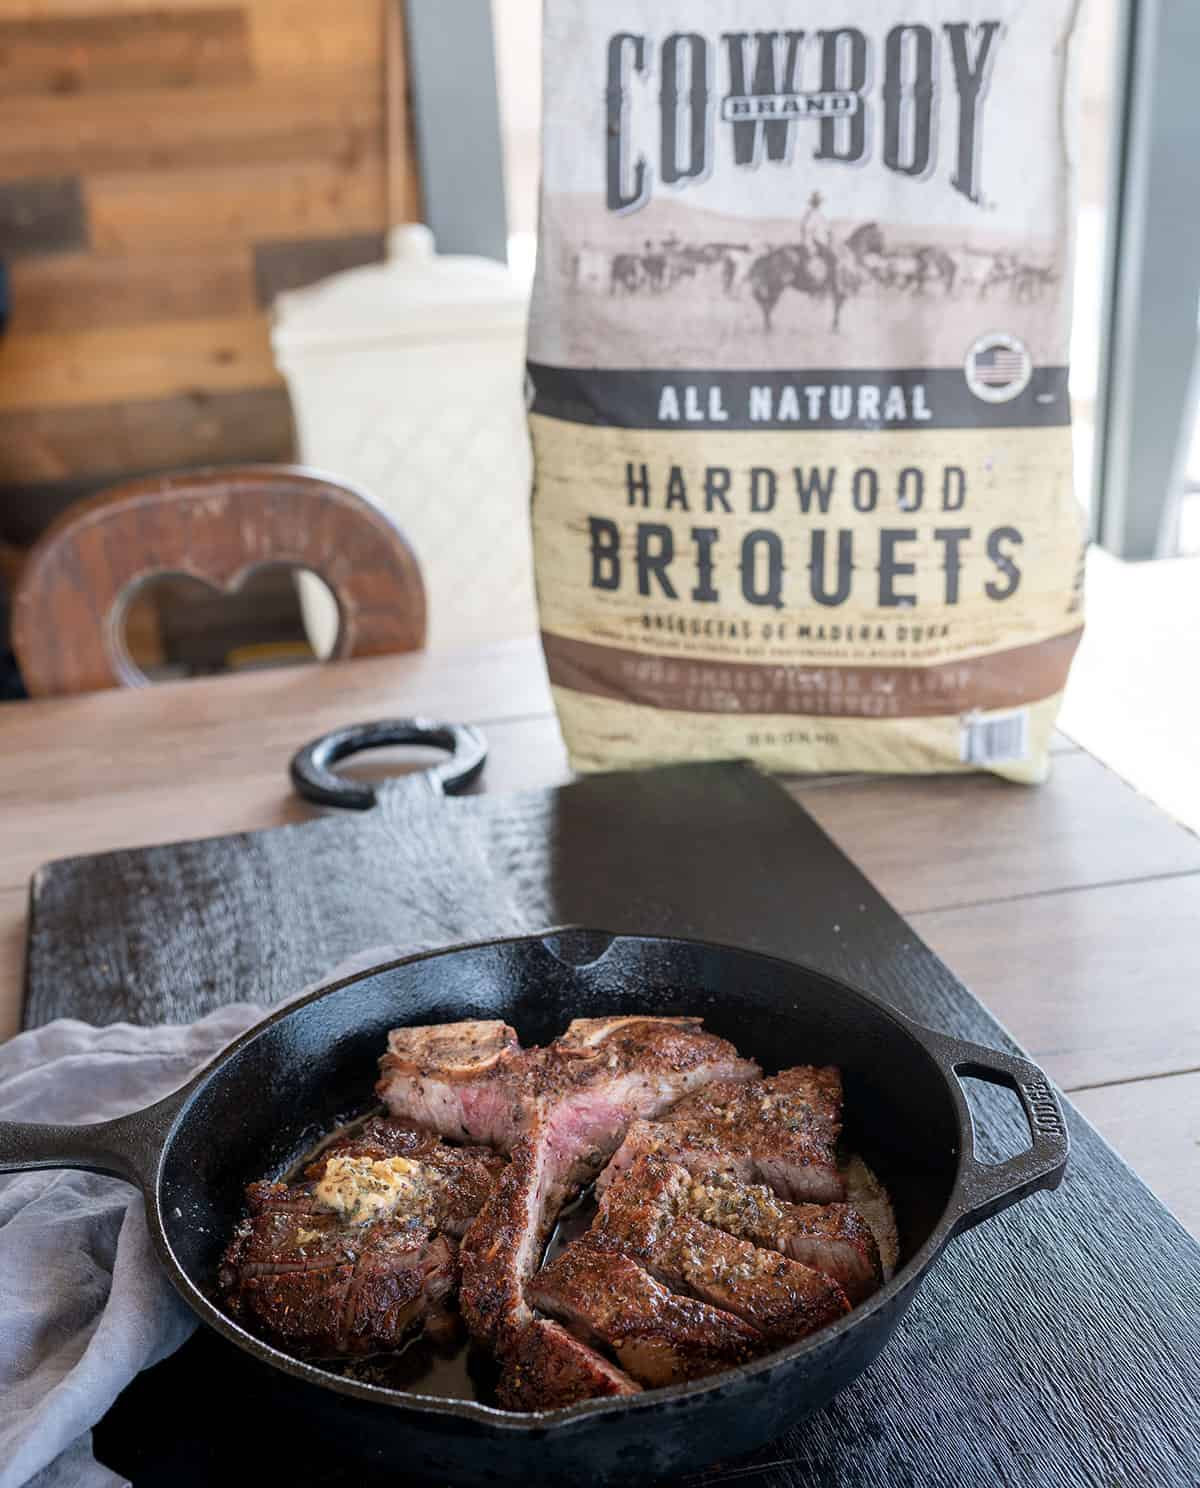 bag of Cowboy Charcoal on table by skillet of grilled porterhouse steak.